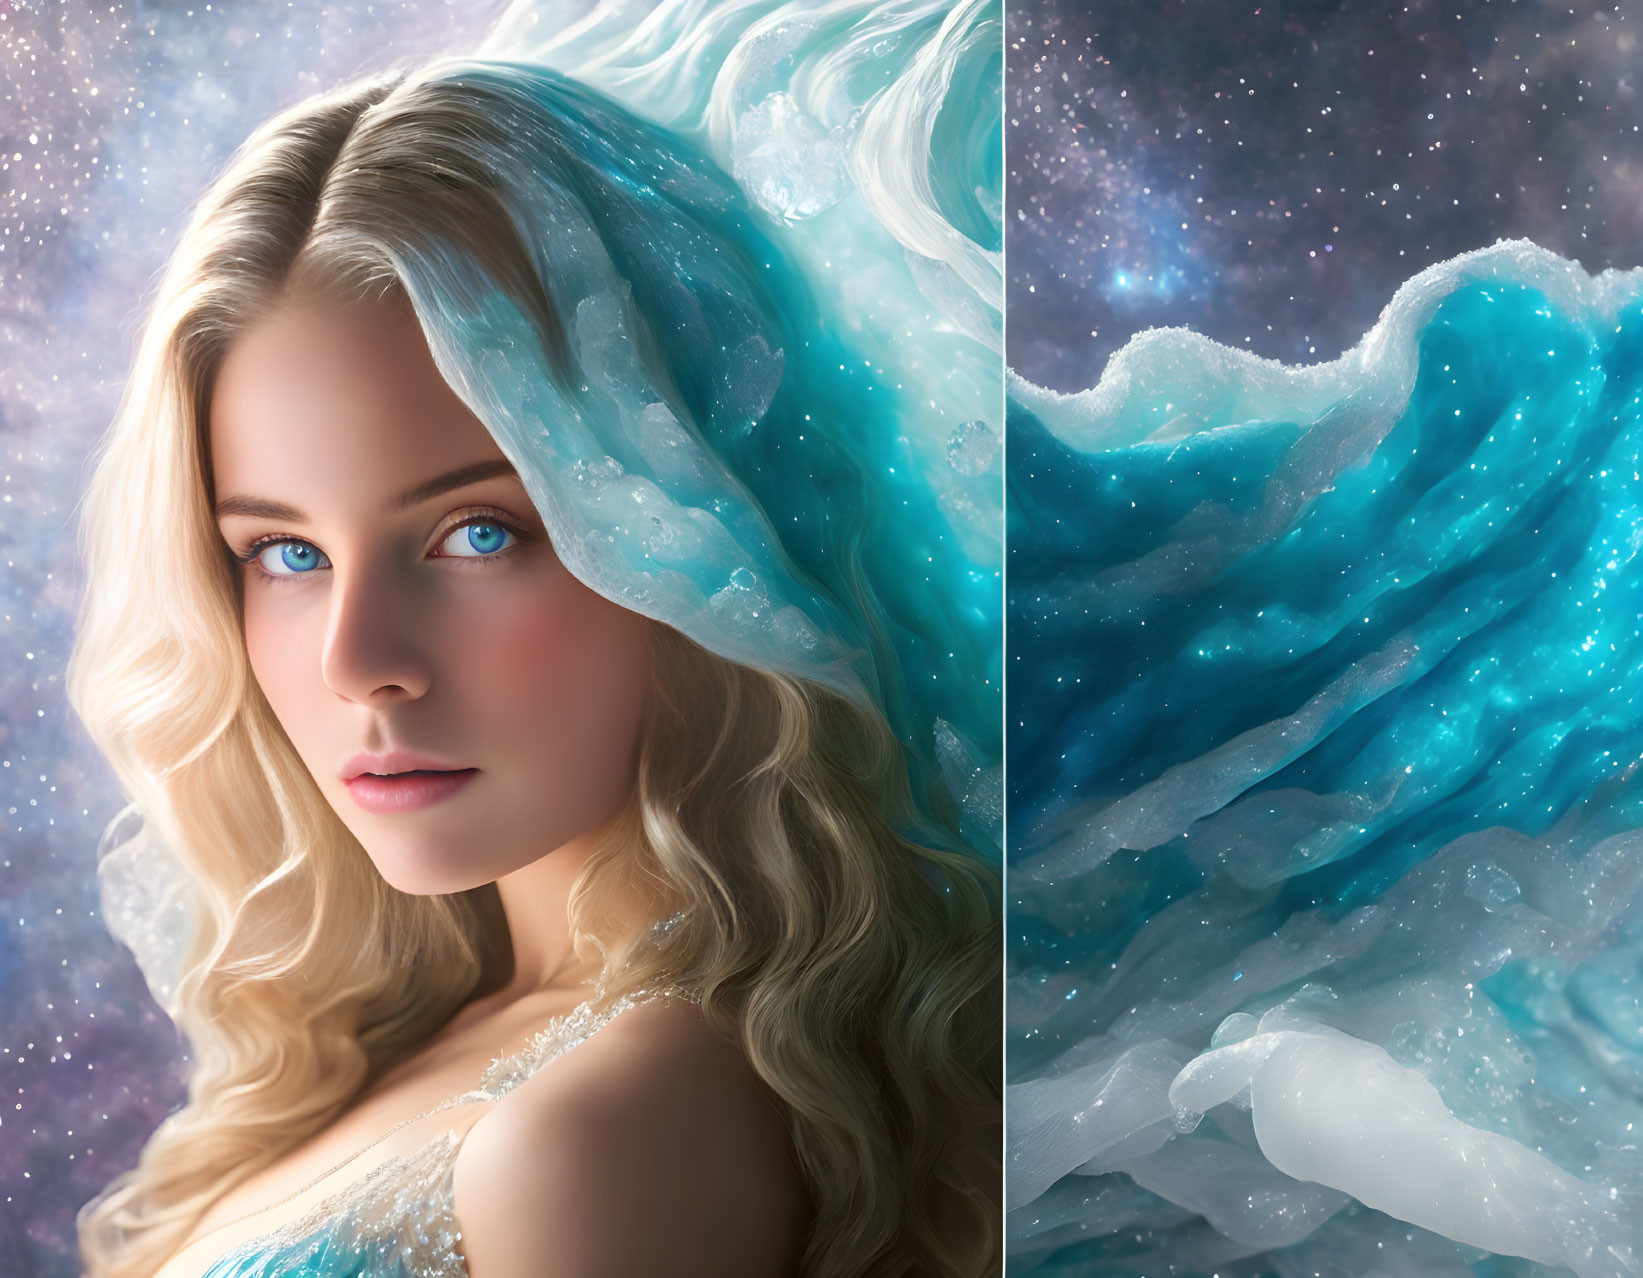 Fantasy portrait of a woman with wavy hair against cosmic backdrop